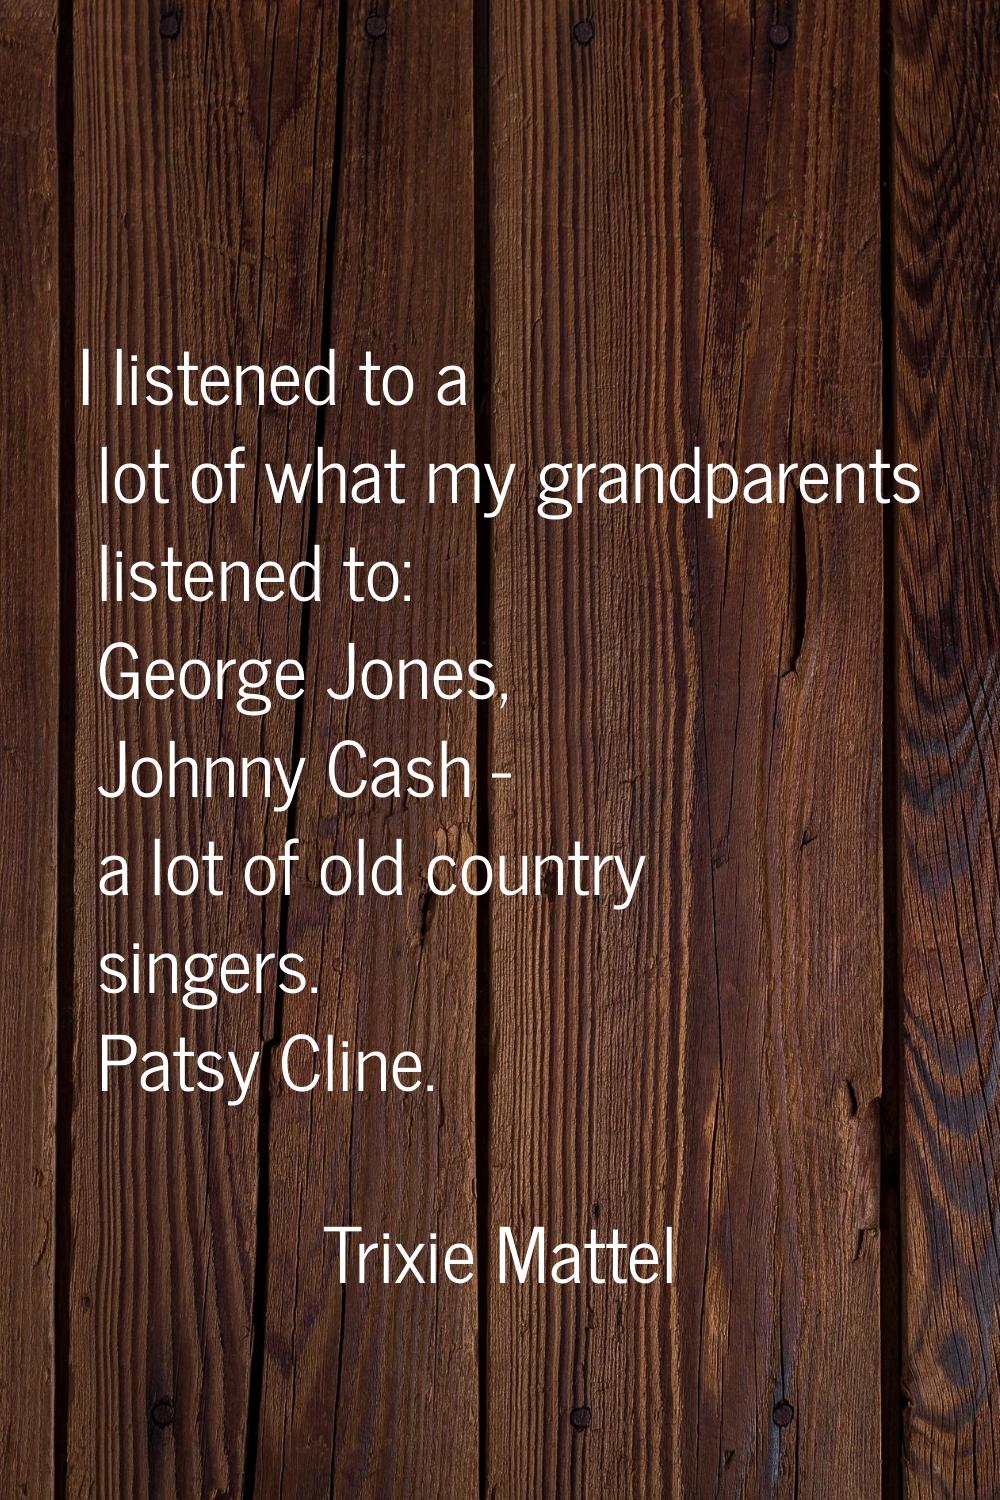 I listened to a lot of what my grandparents listened to: George Jones, Johnny Cash - a lot of old c